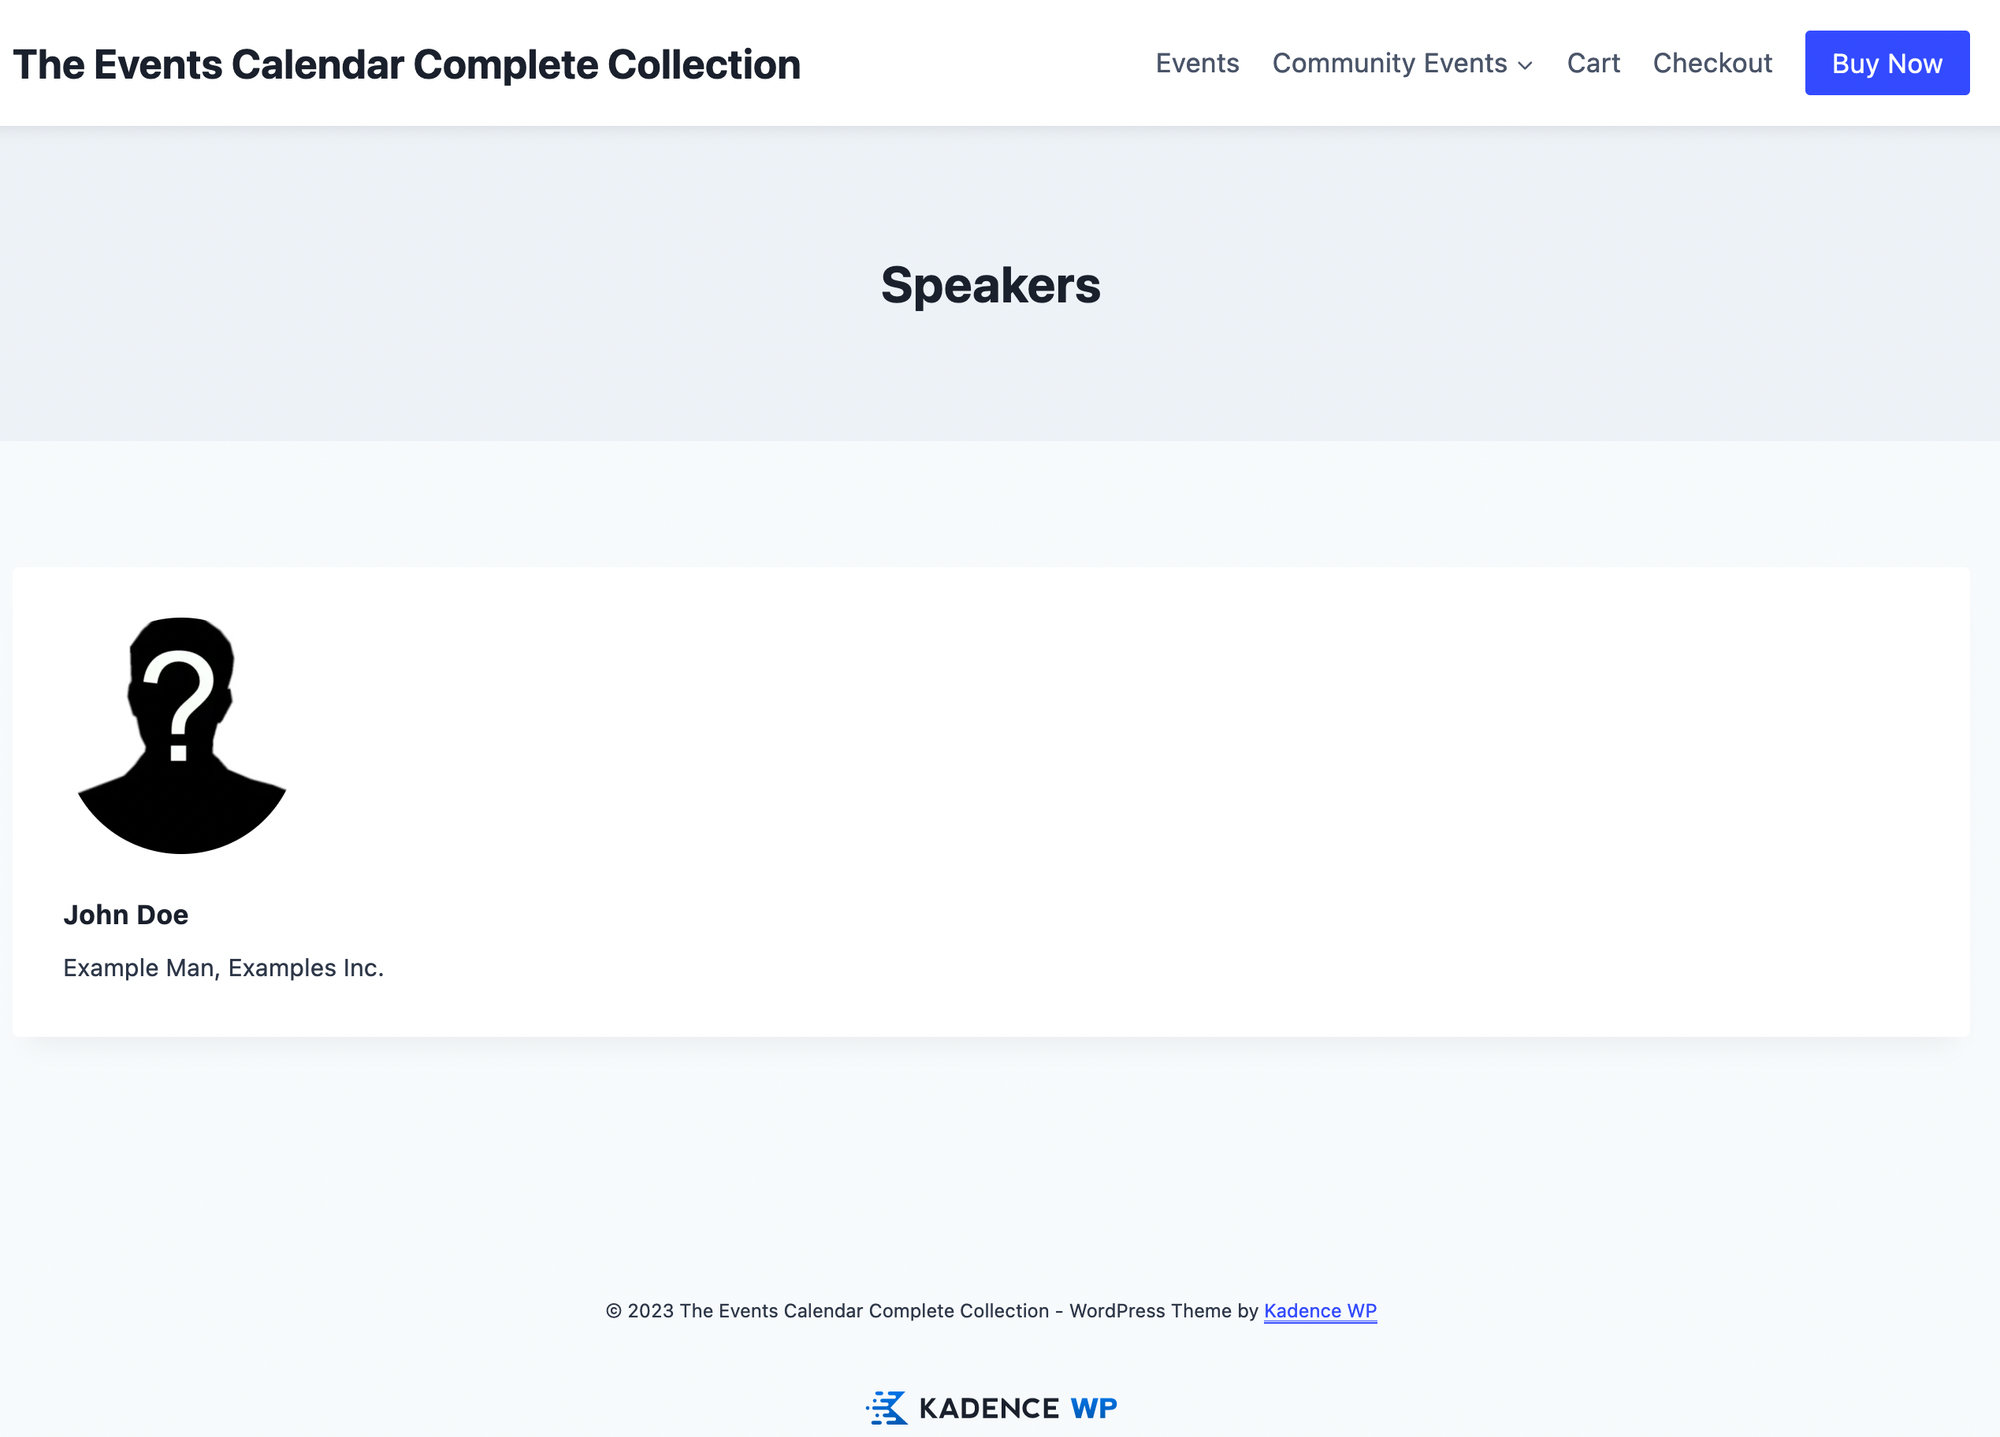 This is an example of what a Speaker Page looks like